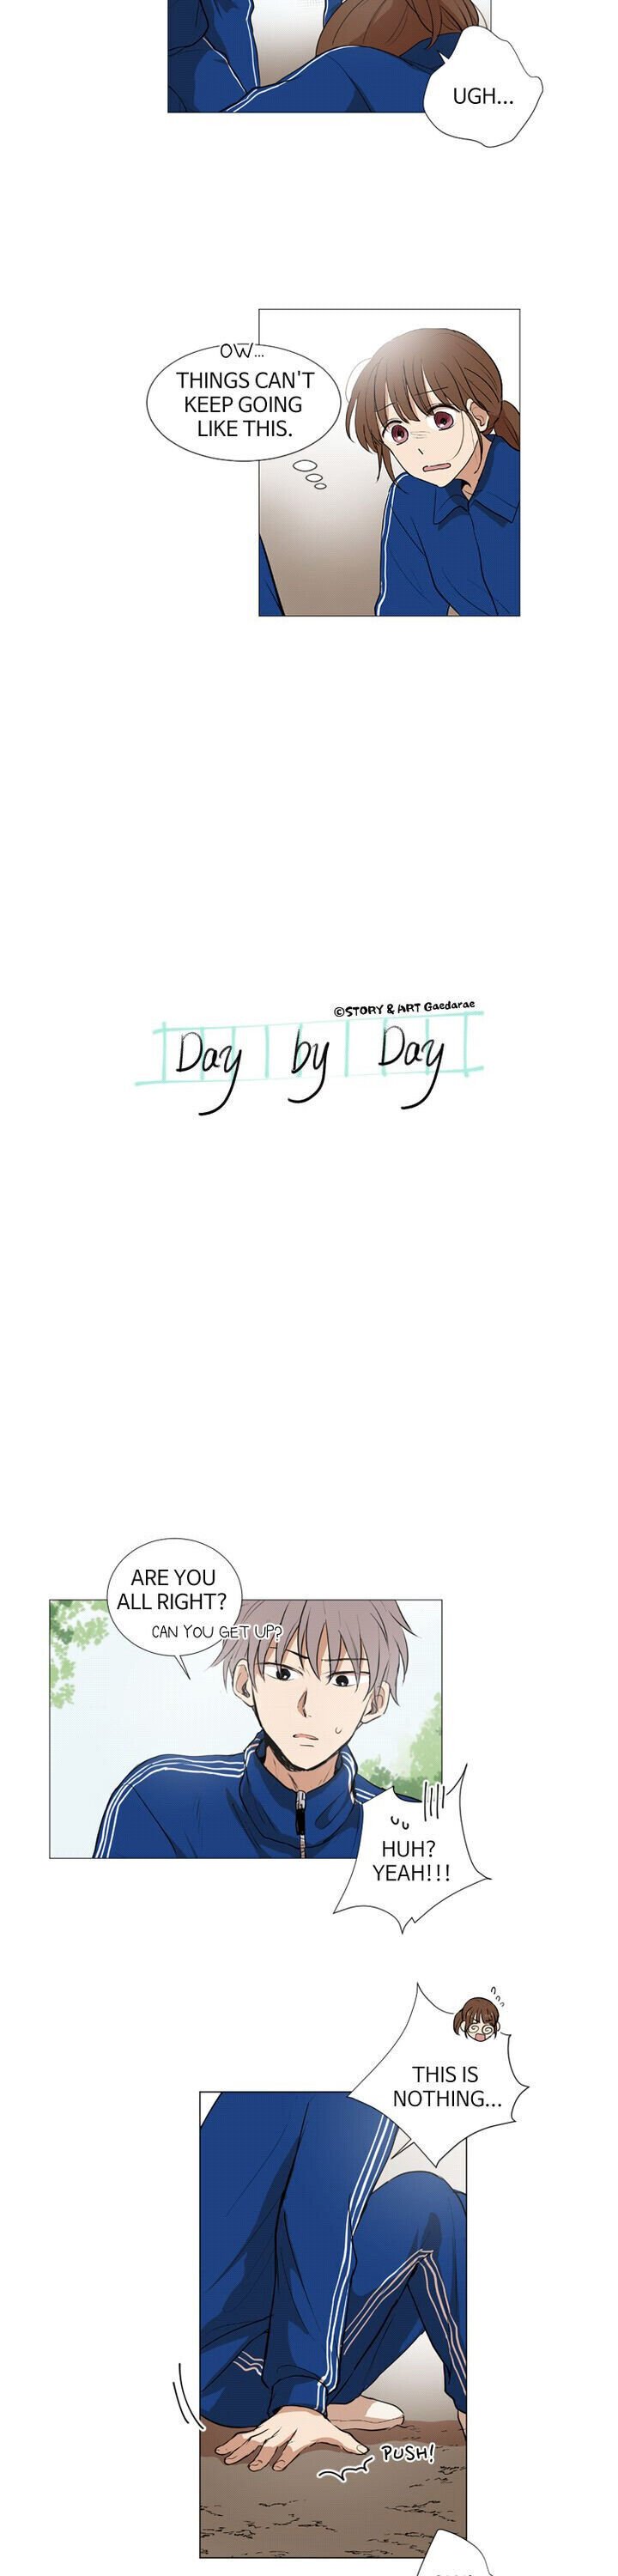 Day By Day - Page 2